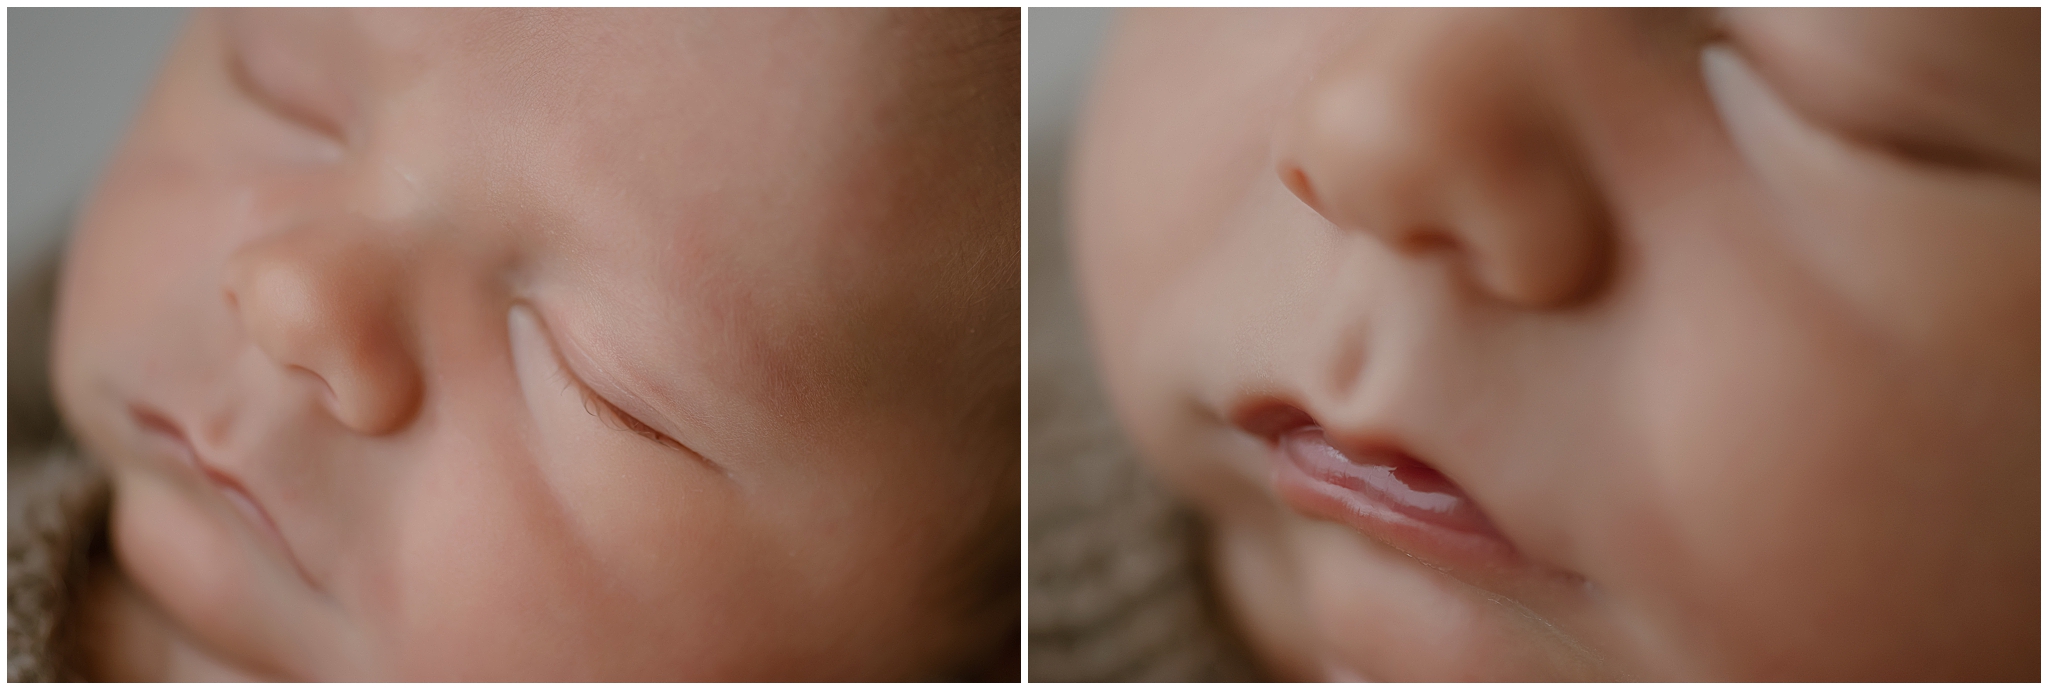 detail images of baby at newborn photography session at studio in london ontario